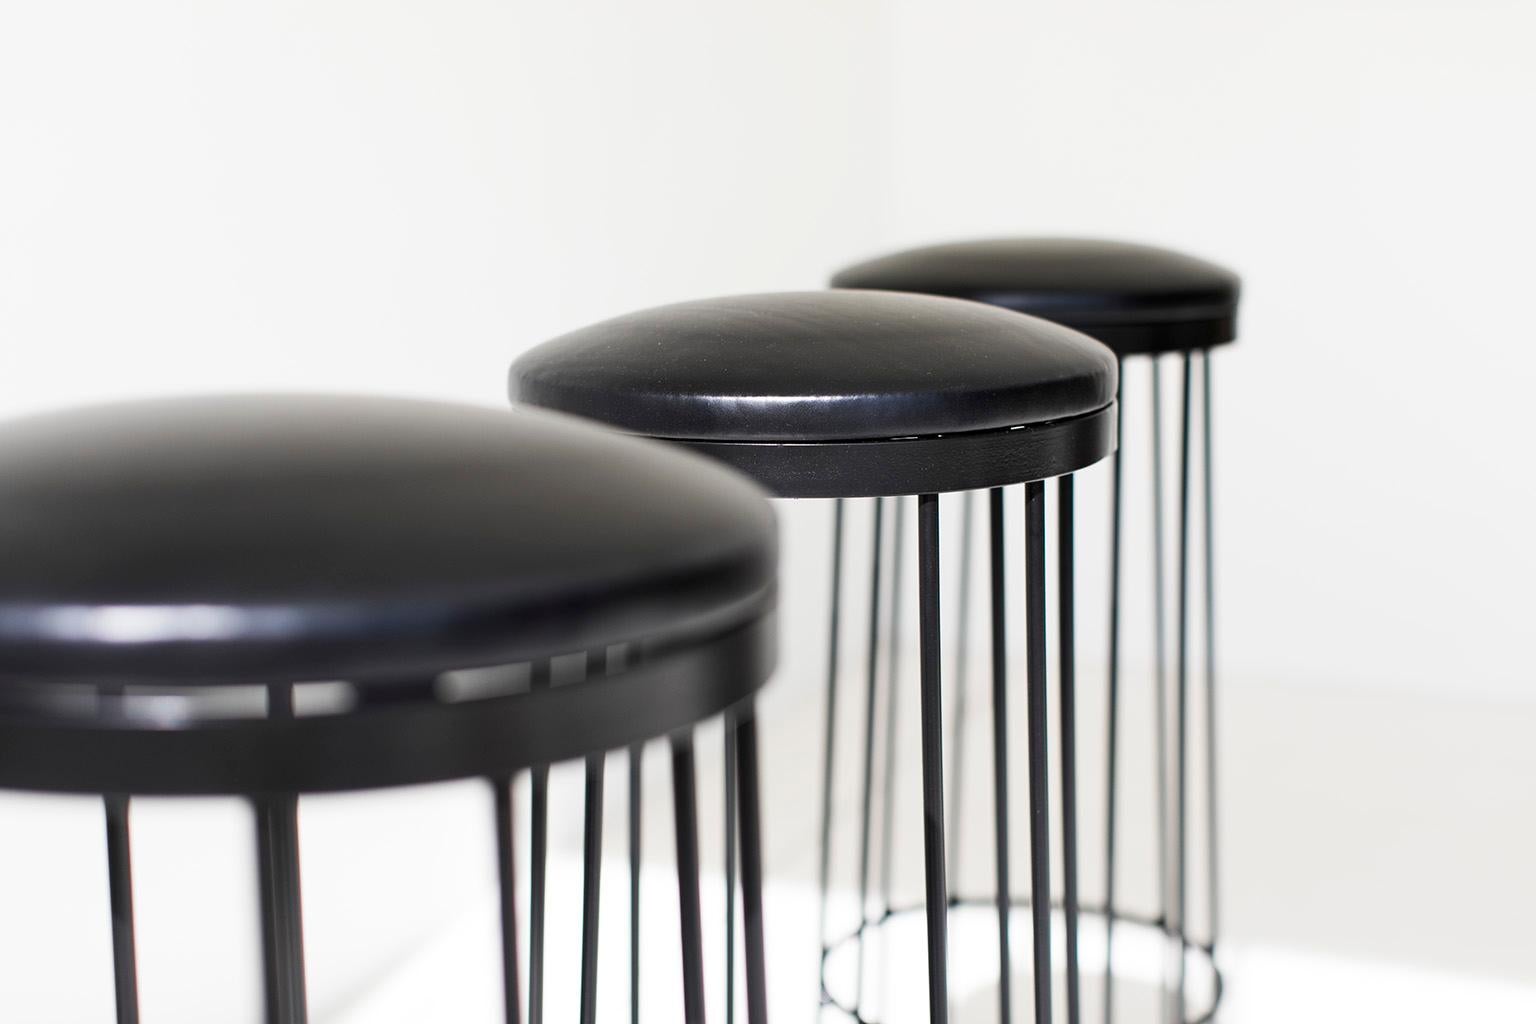 CraftAssociates Counter Height Stool, Modern counter height stool, metal, leather

These metal counter height stools in Leather for Craft Associates Furniture are expertly handcrafted in wrought iron and leather. Each chair base is constructed by